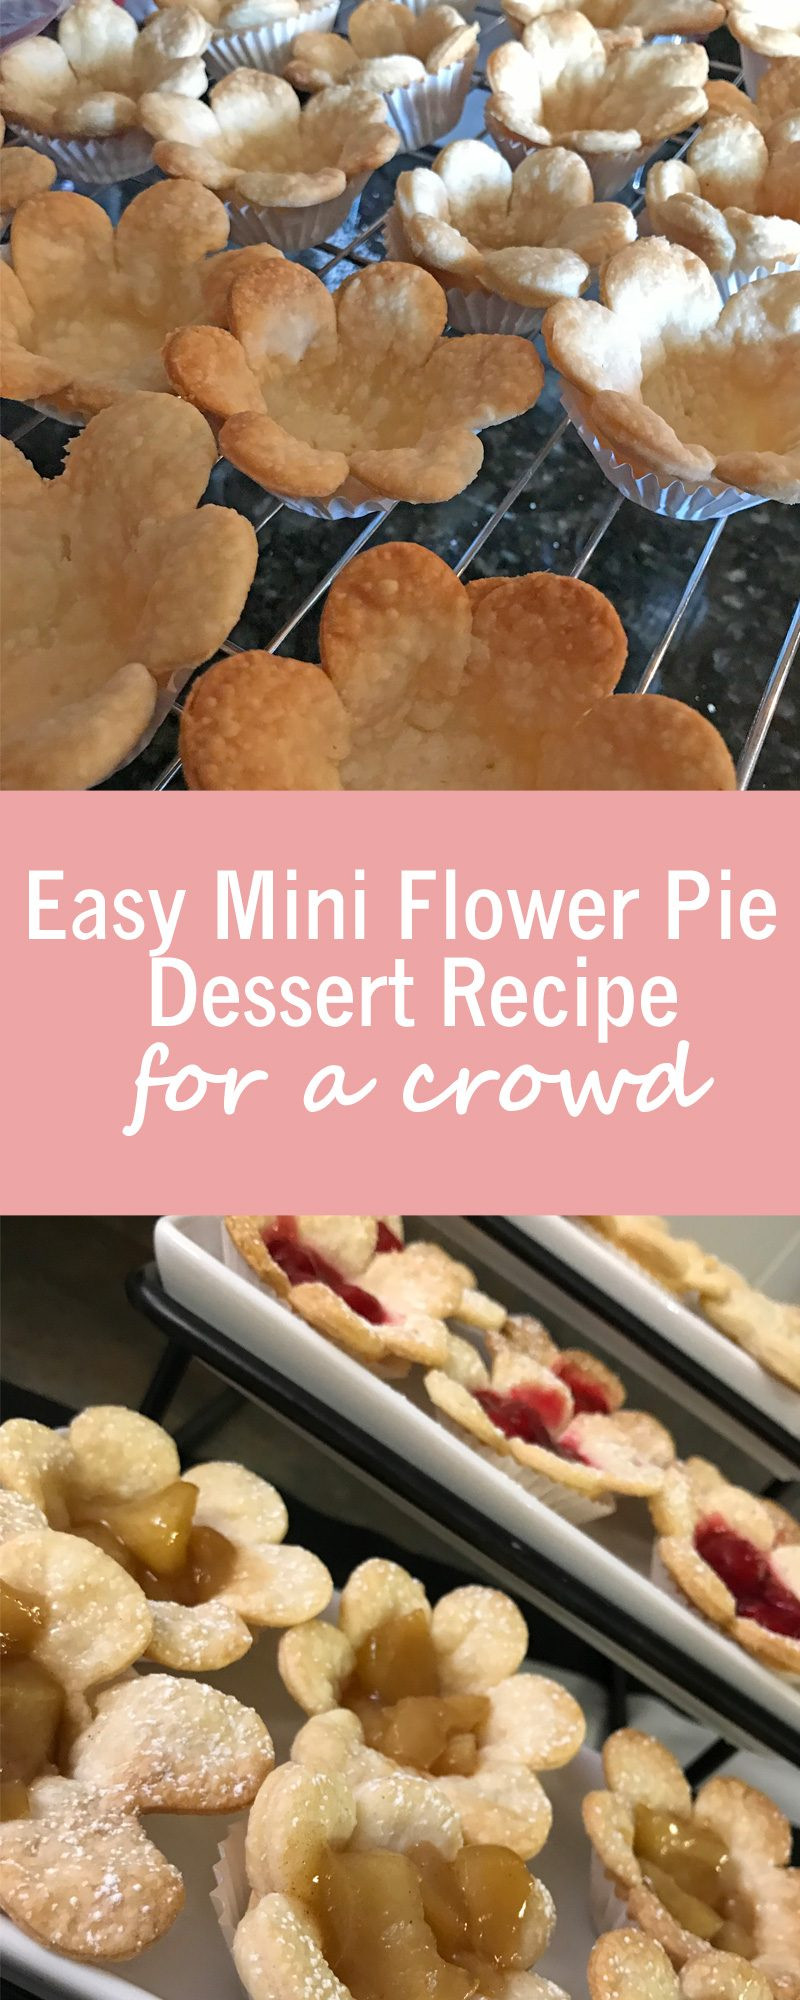 Easy Fall Desserts For A Crowd
 Easy Mini Flower Pie Dessert Recipe for a crowd